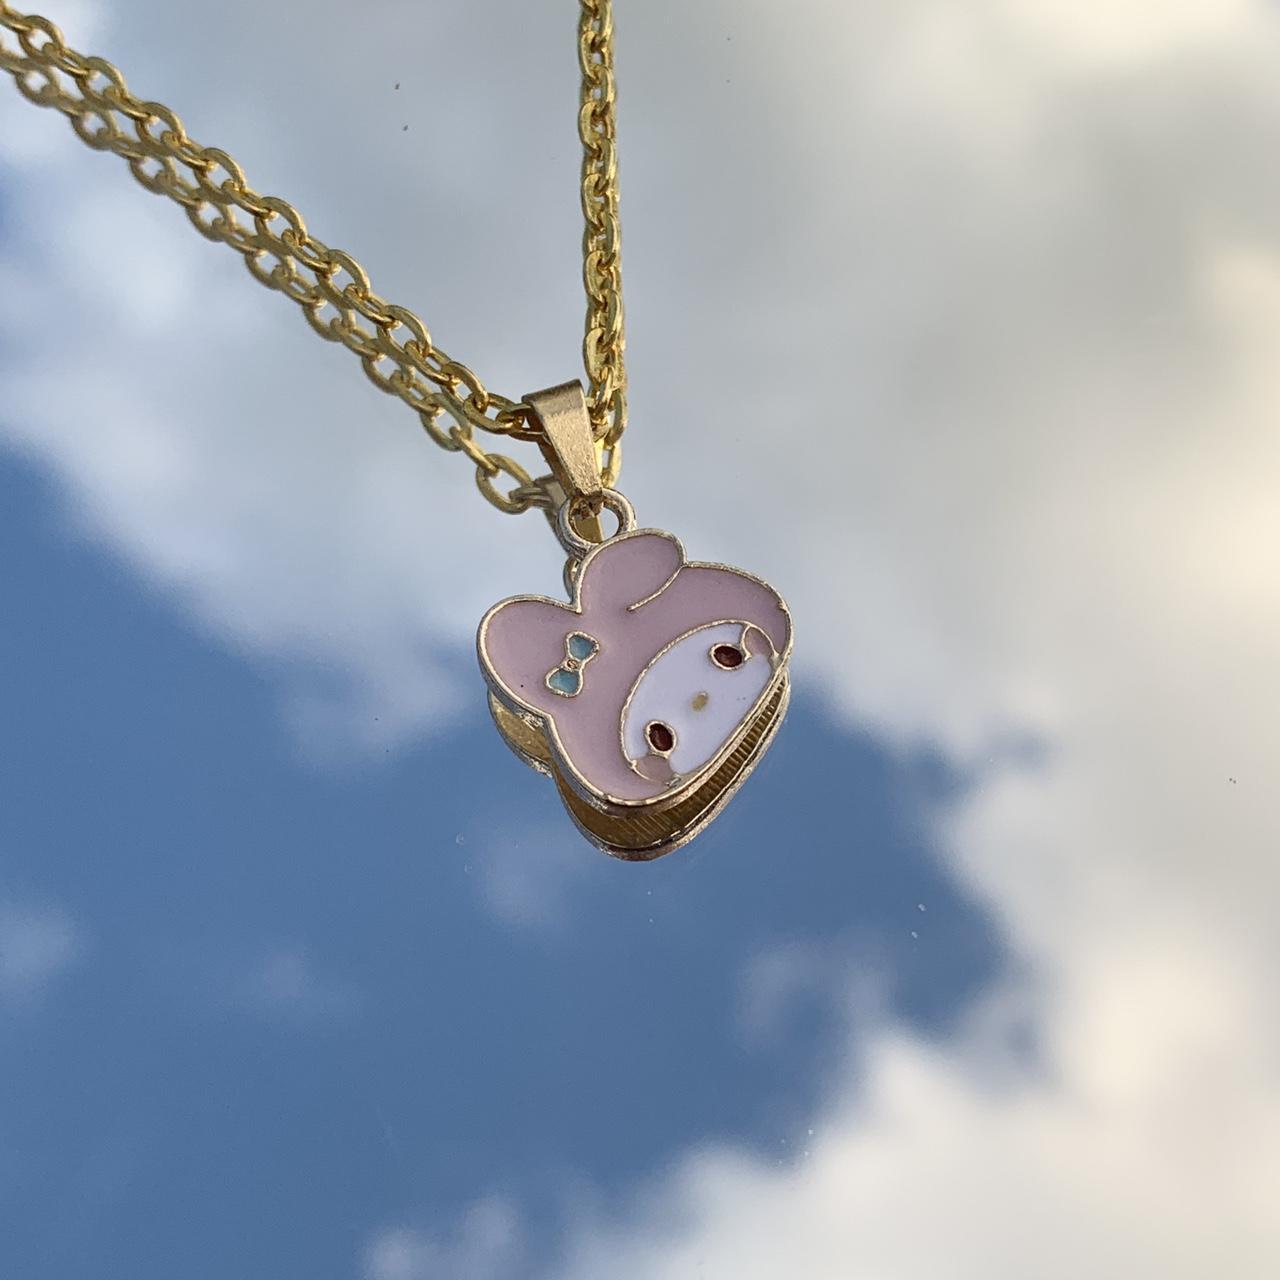 Sanrio Women's Gold and Pink Jewellery